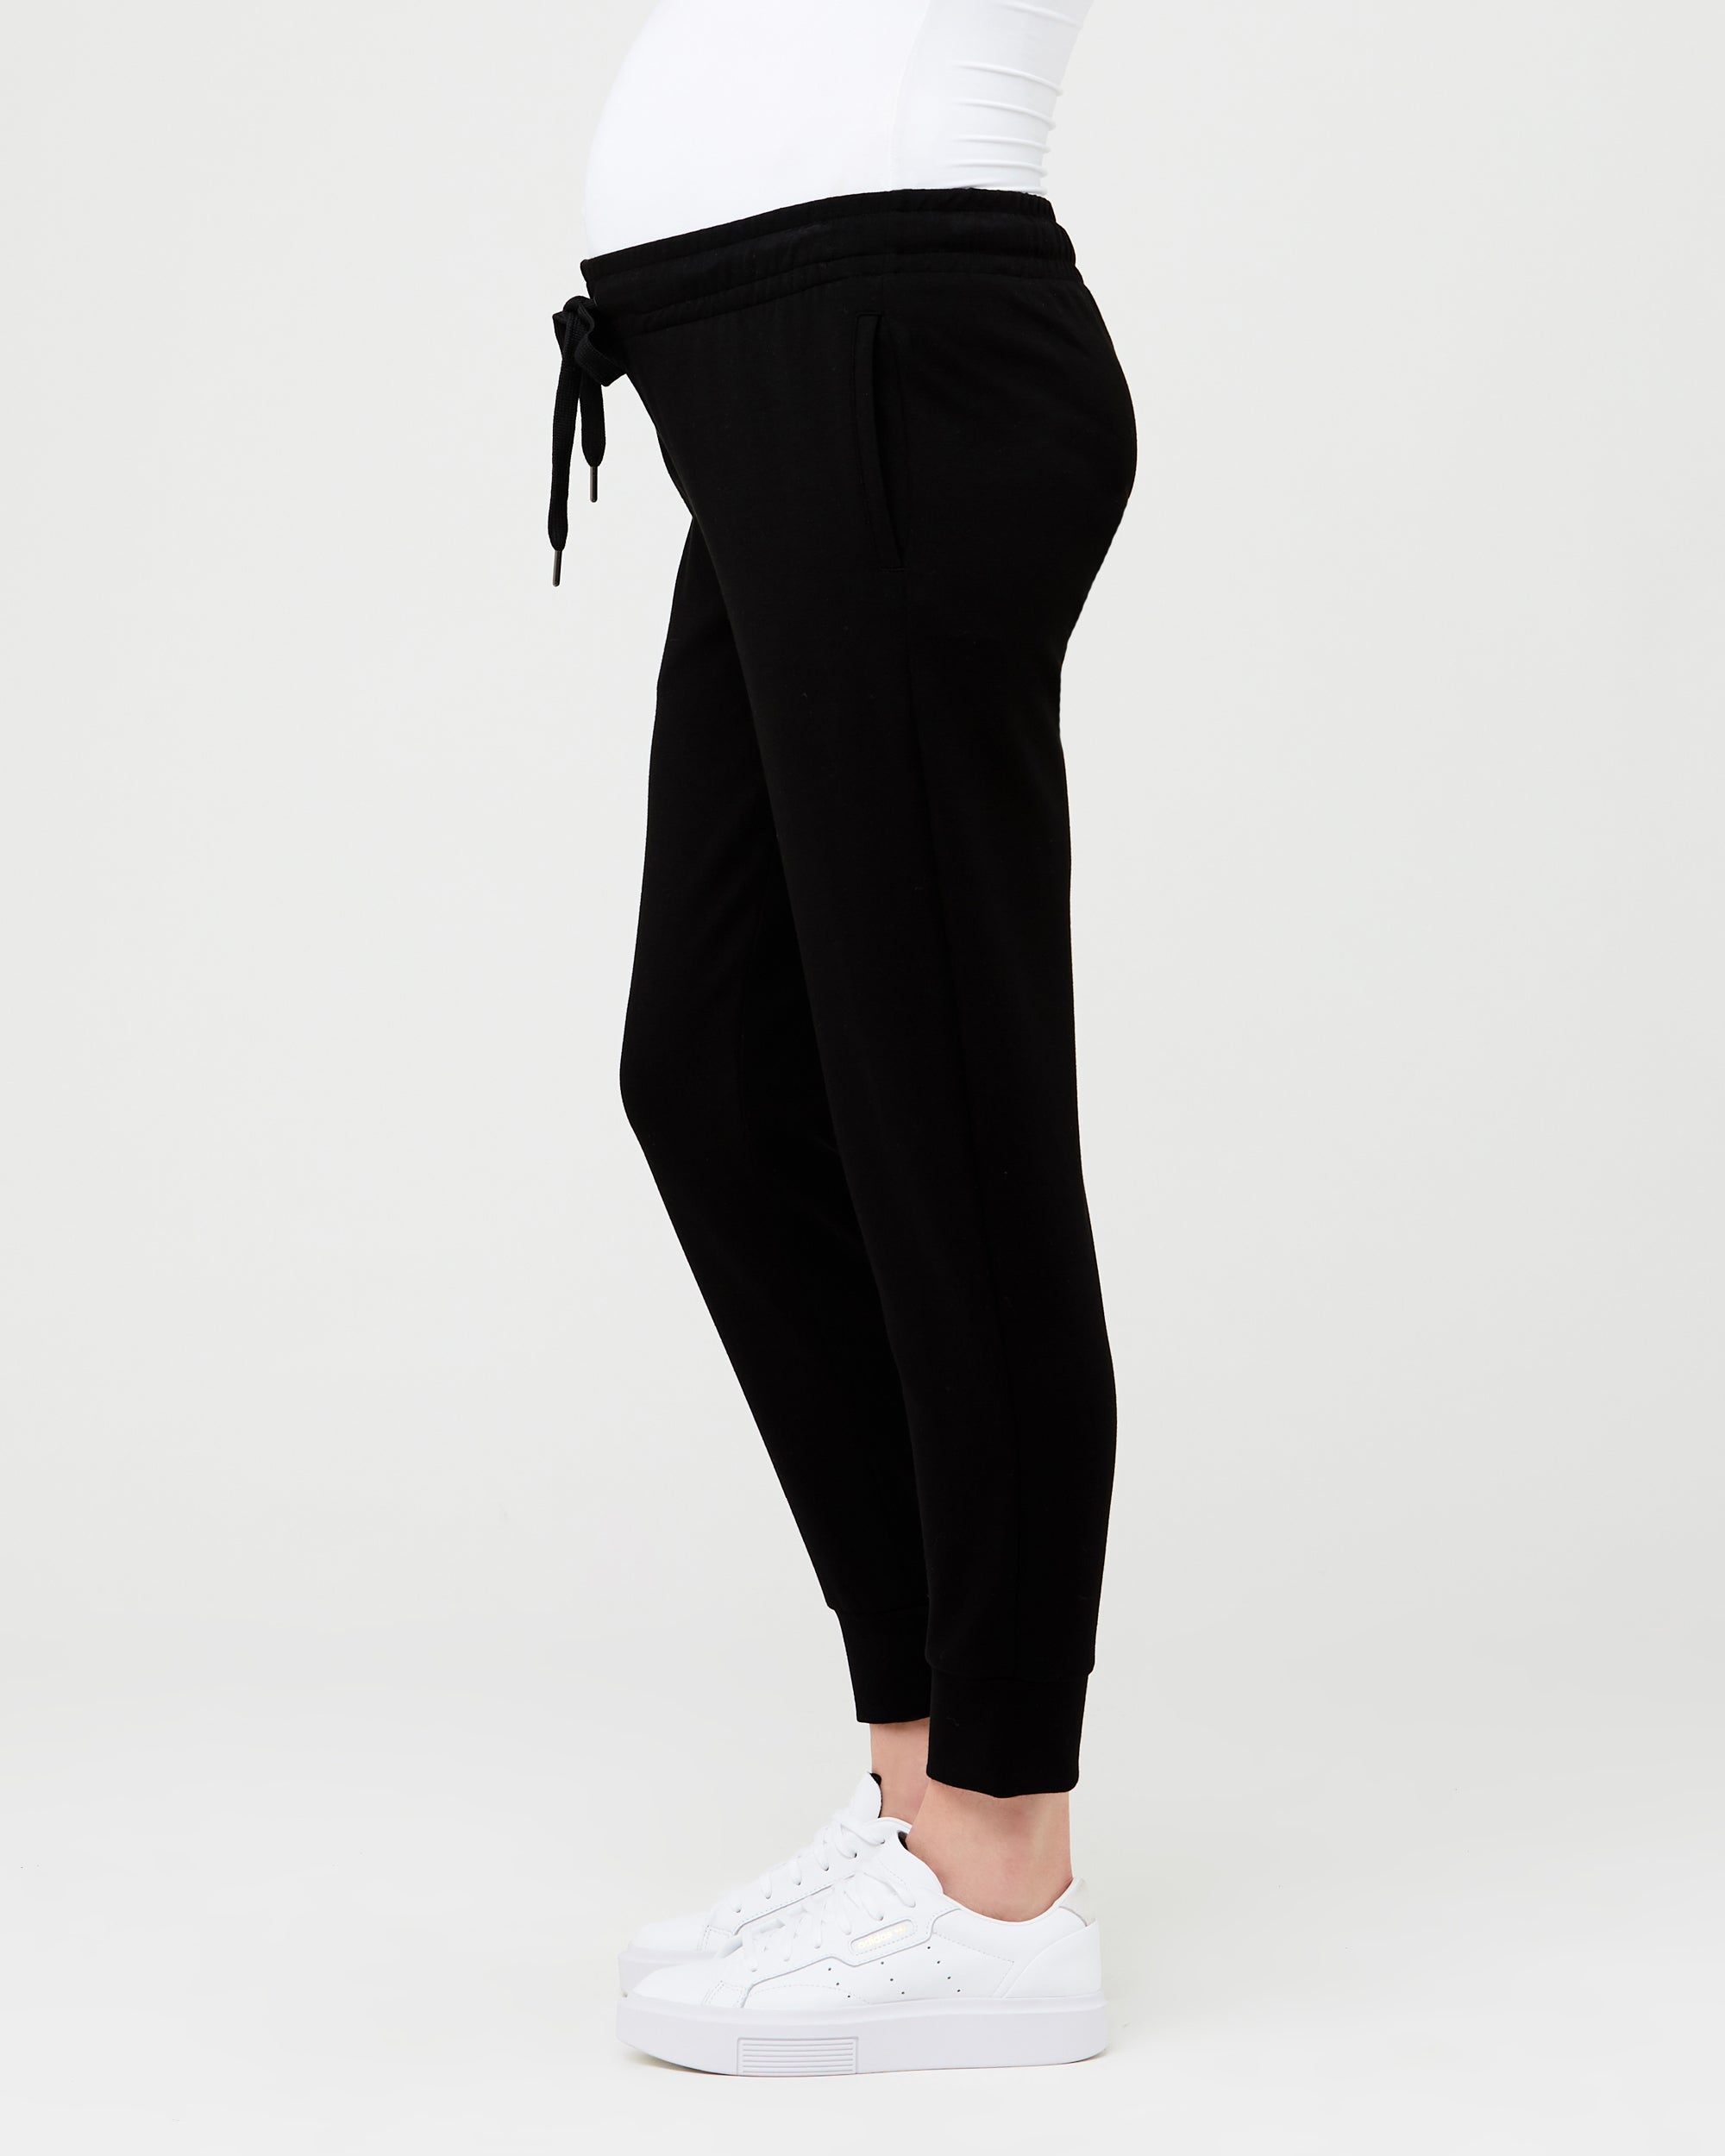 Post workout OOTD - Black Scuba Joggers with embroidered